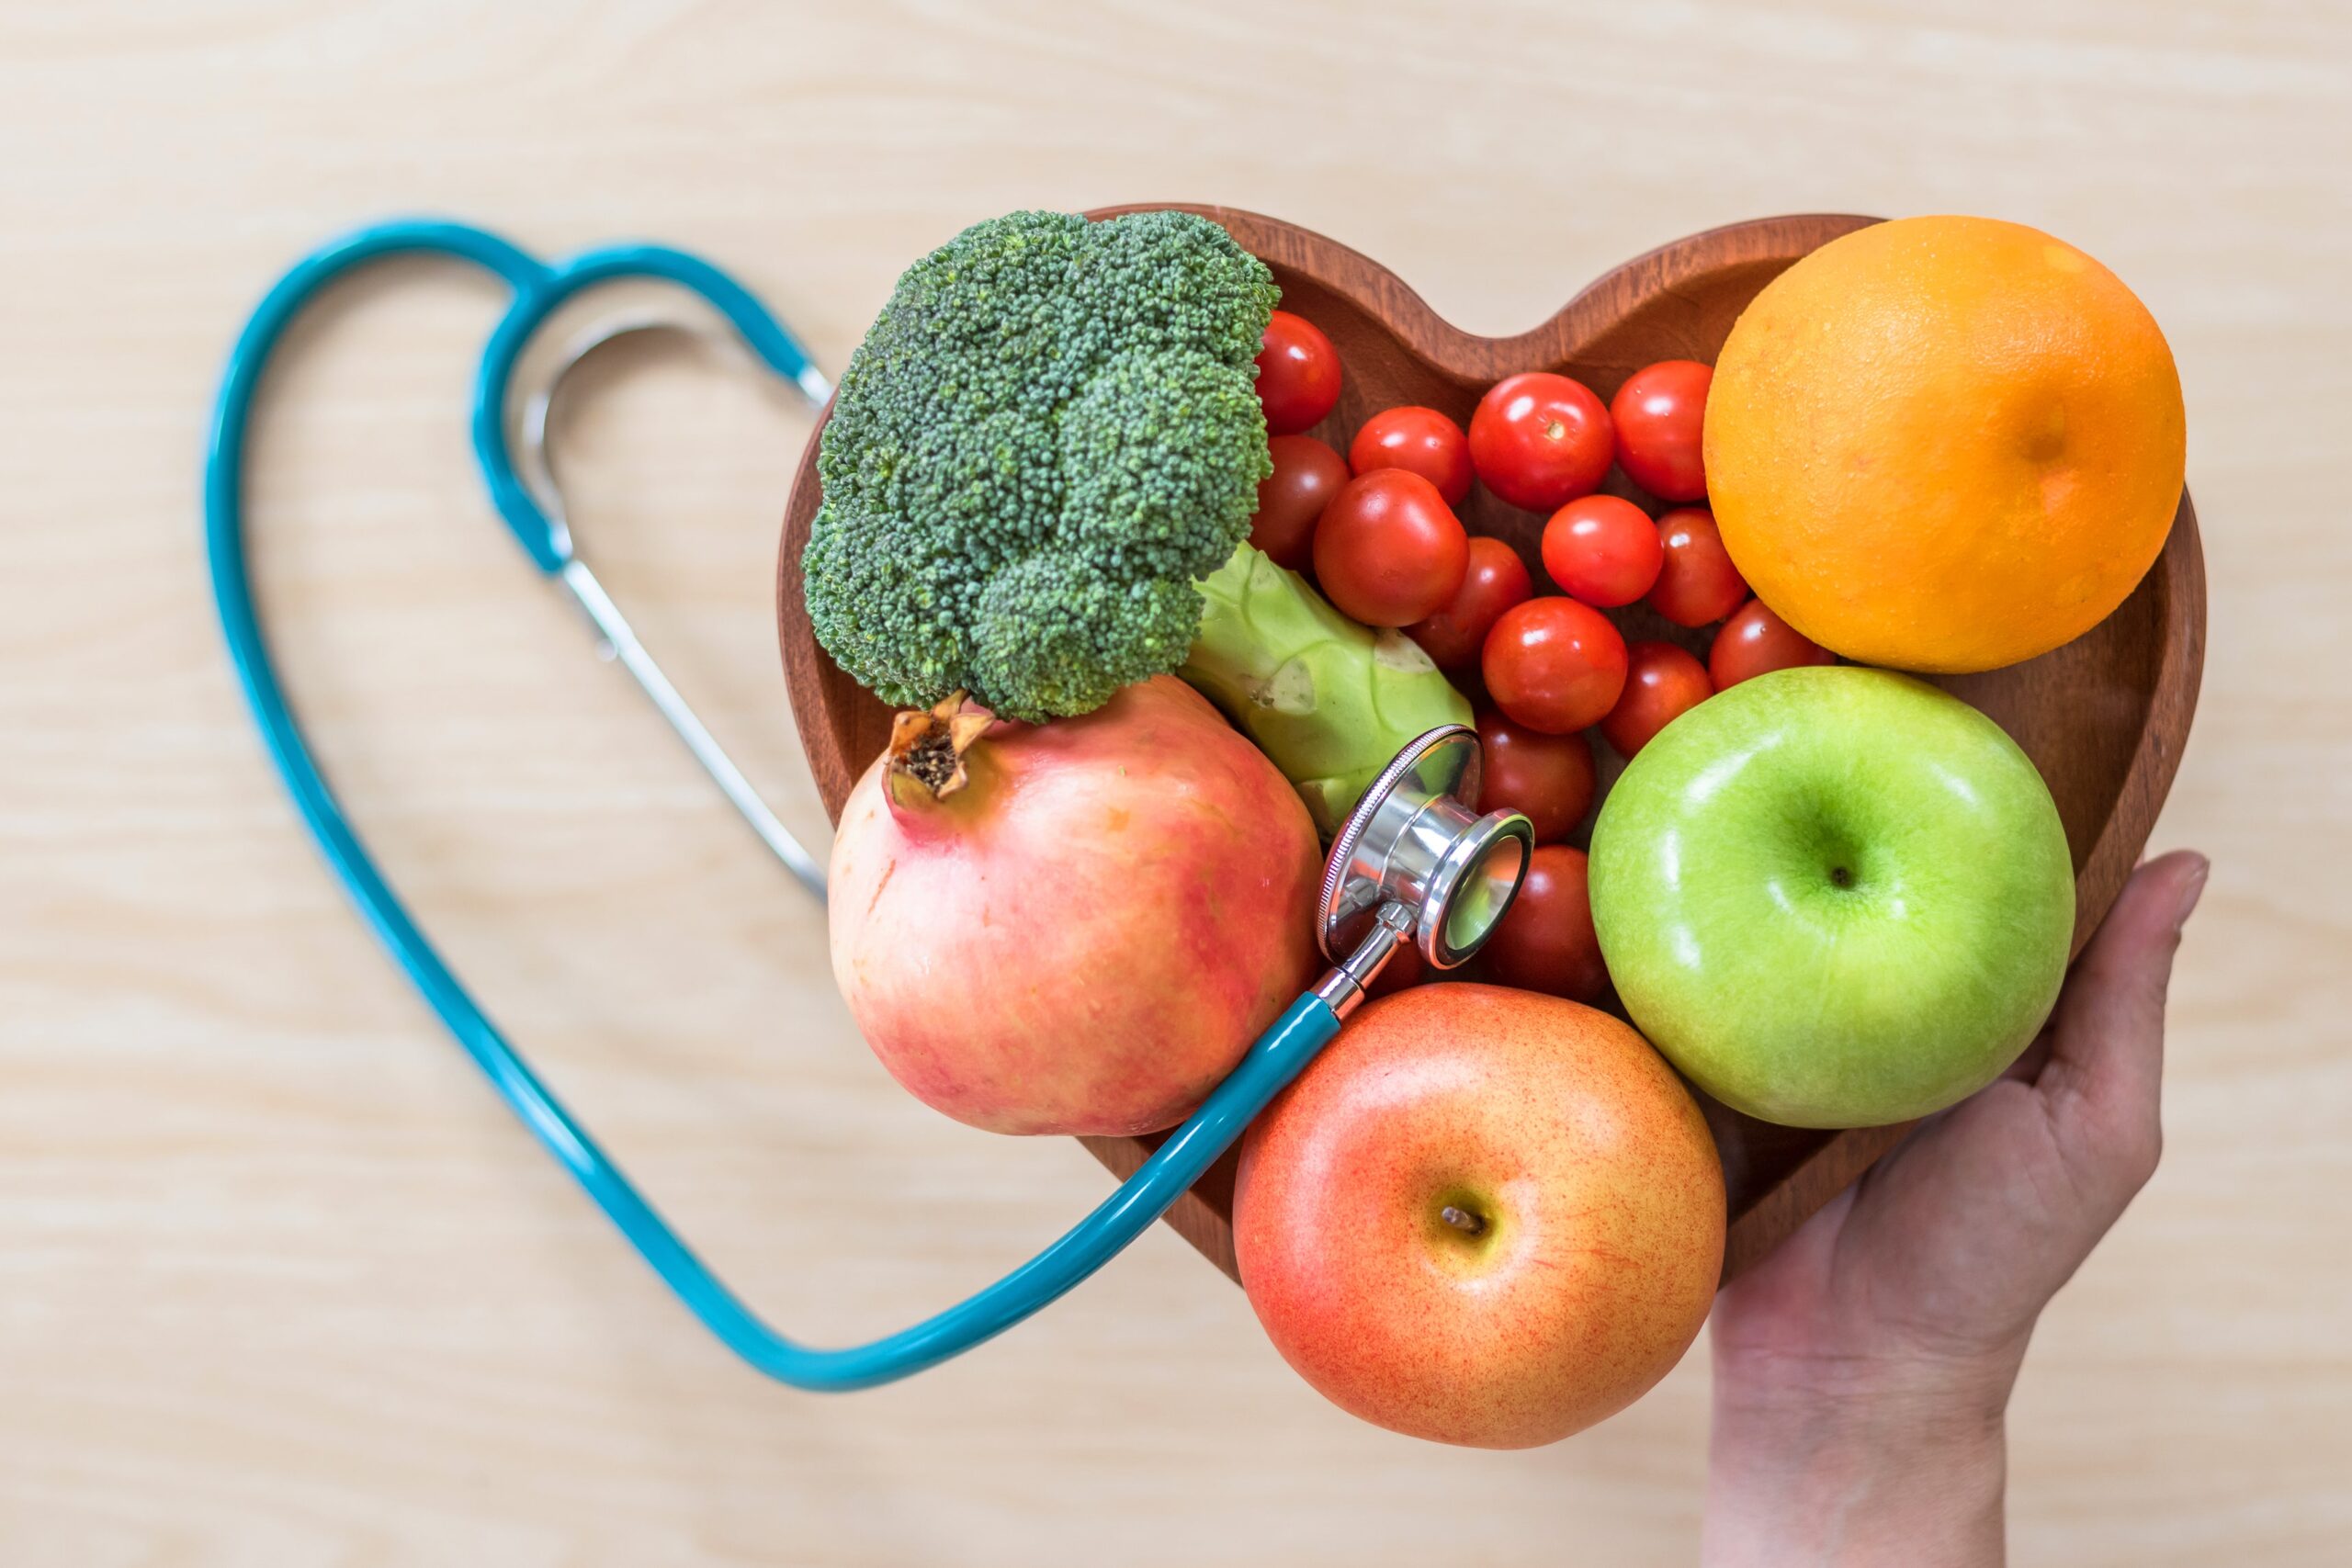 Fruits and veggies in heart shaped bowl, beside stethoscope in heart shape